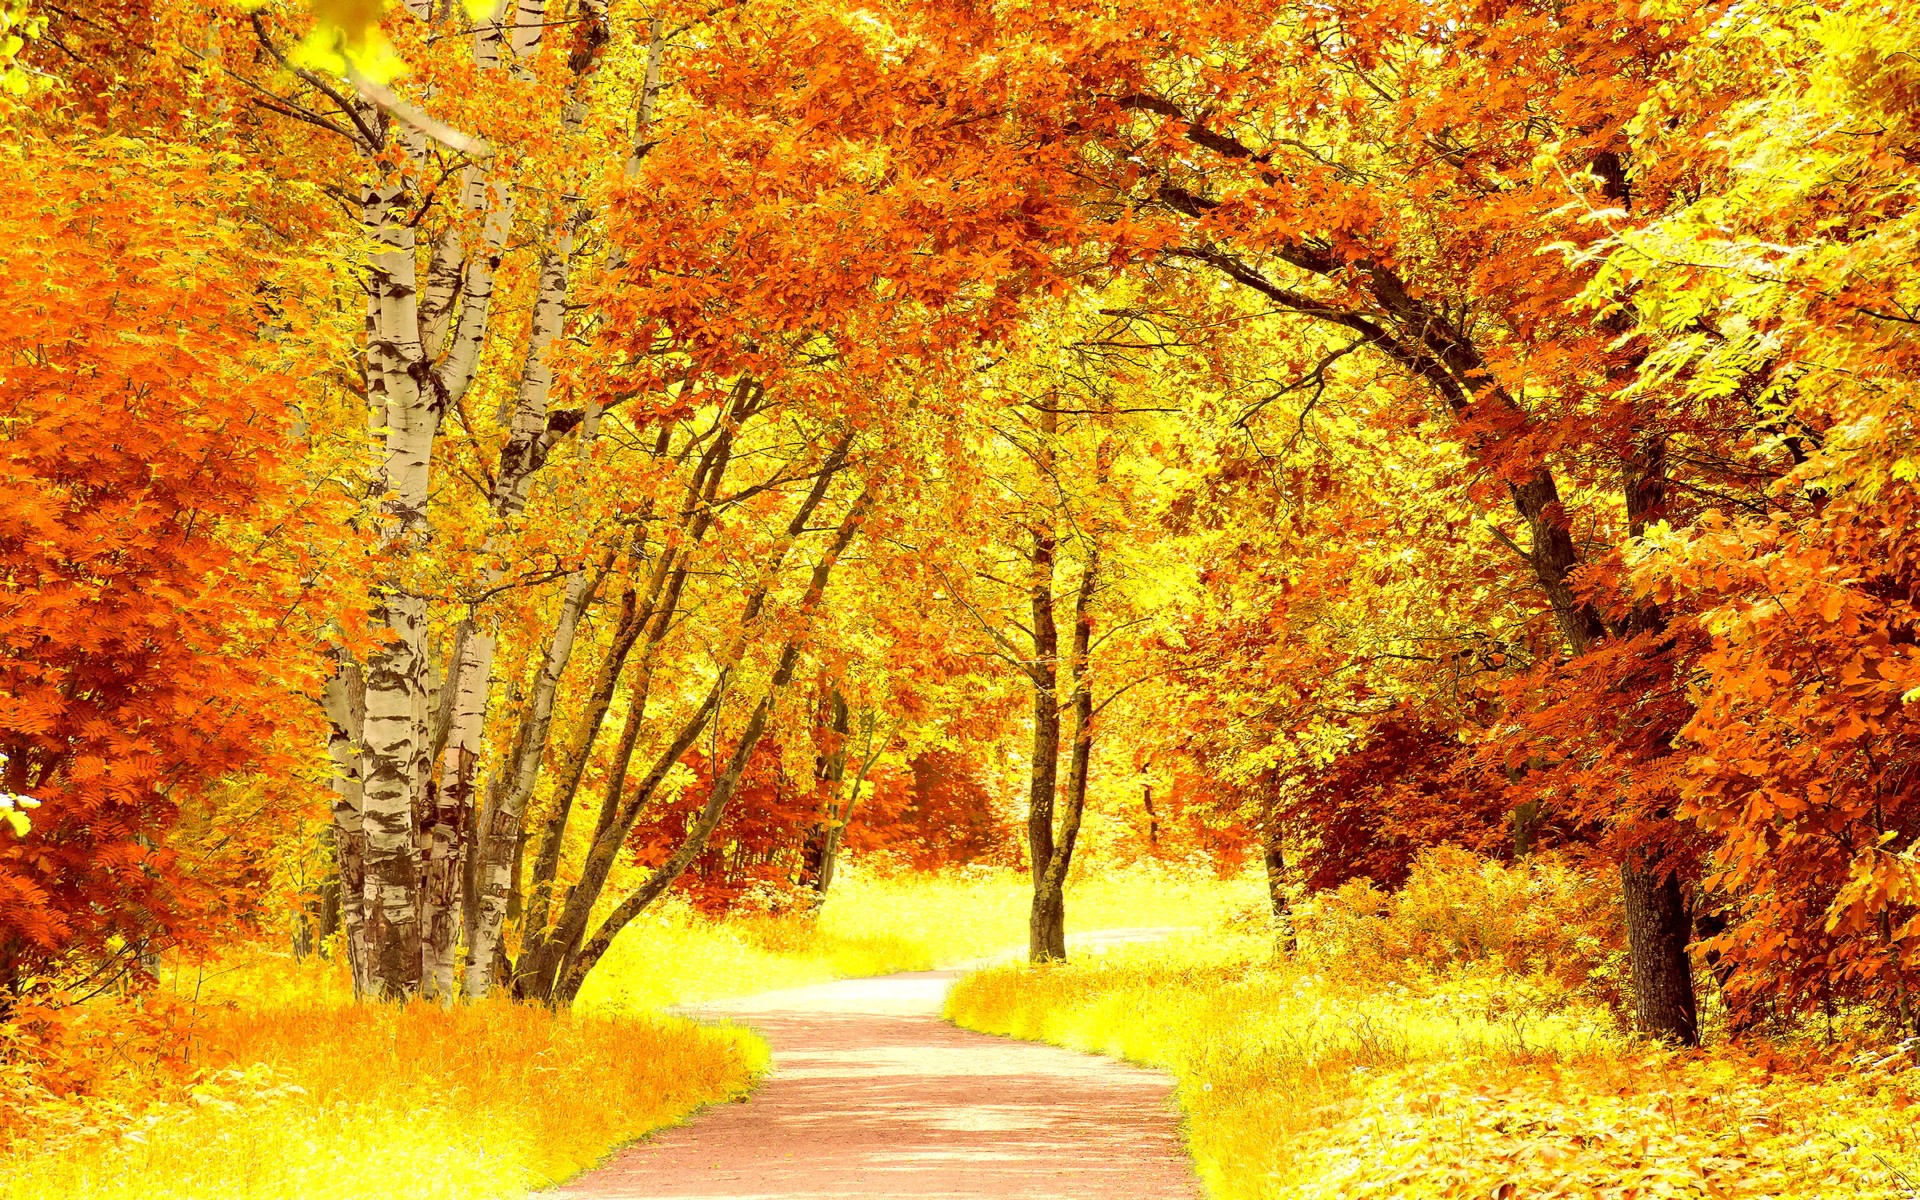 General 1920x1200 plants trees path fall warm colors yellow yellow leaves